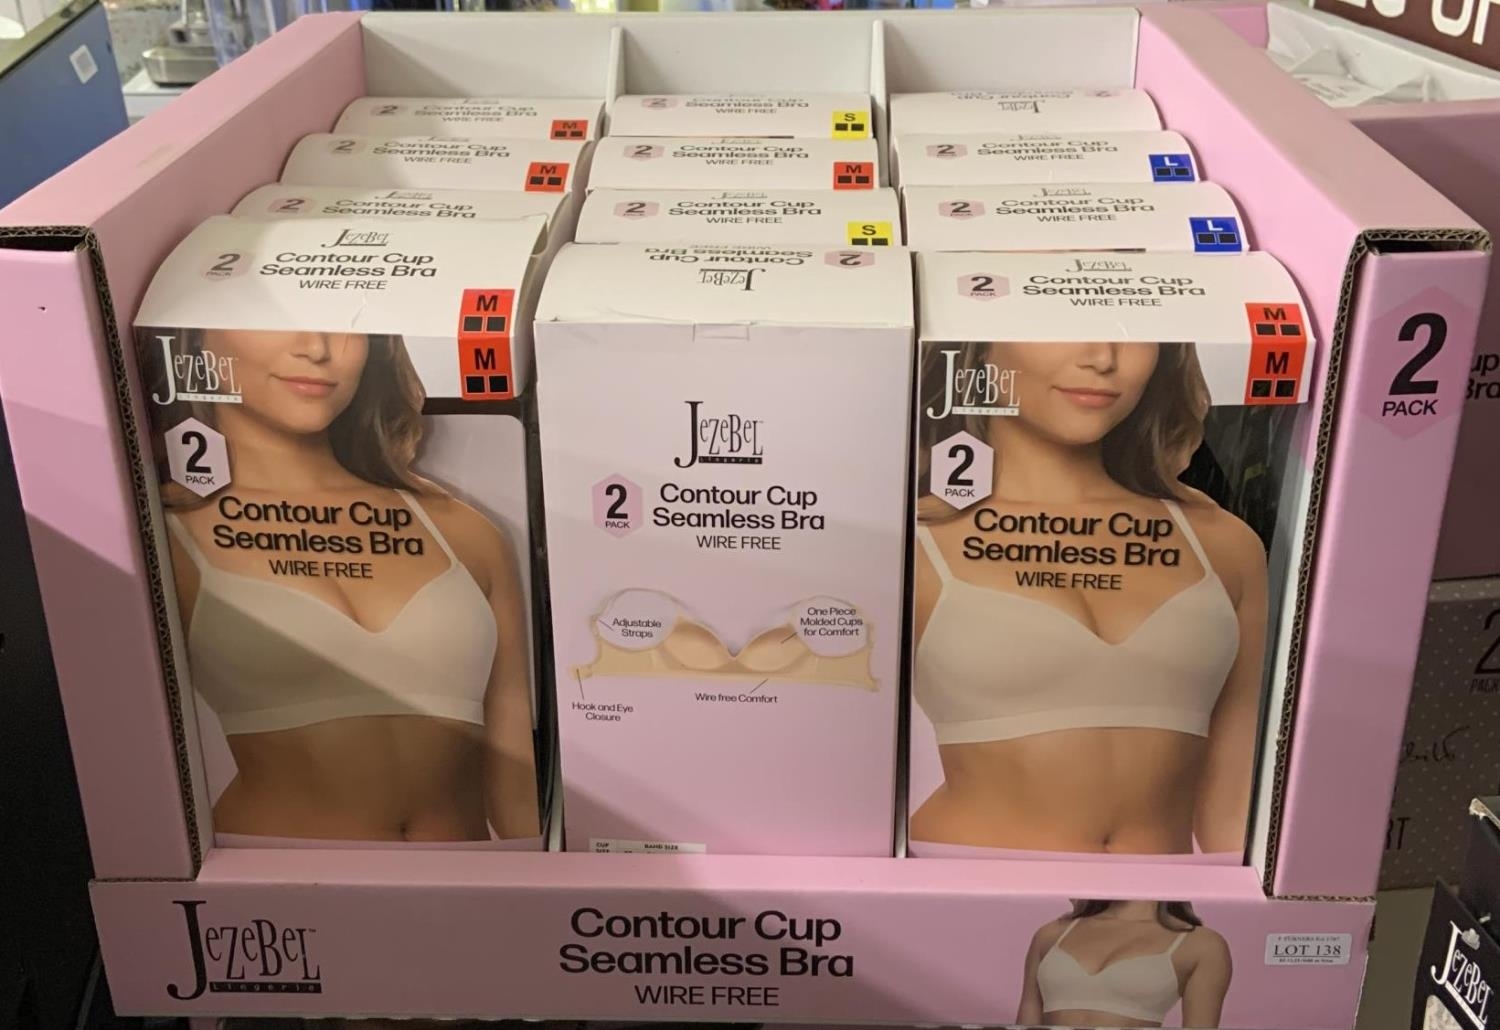 12 PACKS OF JEZEBEL CONTOUR CUP SEAMLESS BRA DUO PACKS - S/M/L